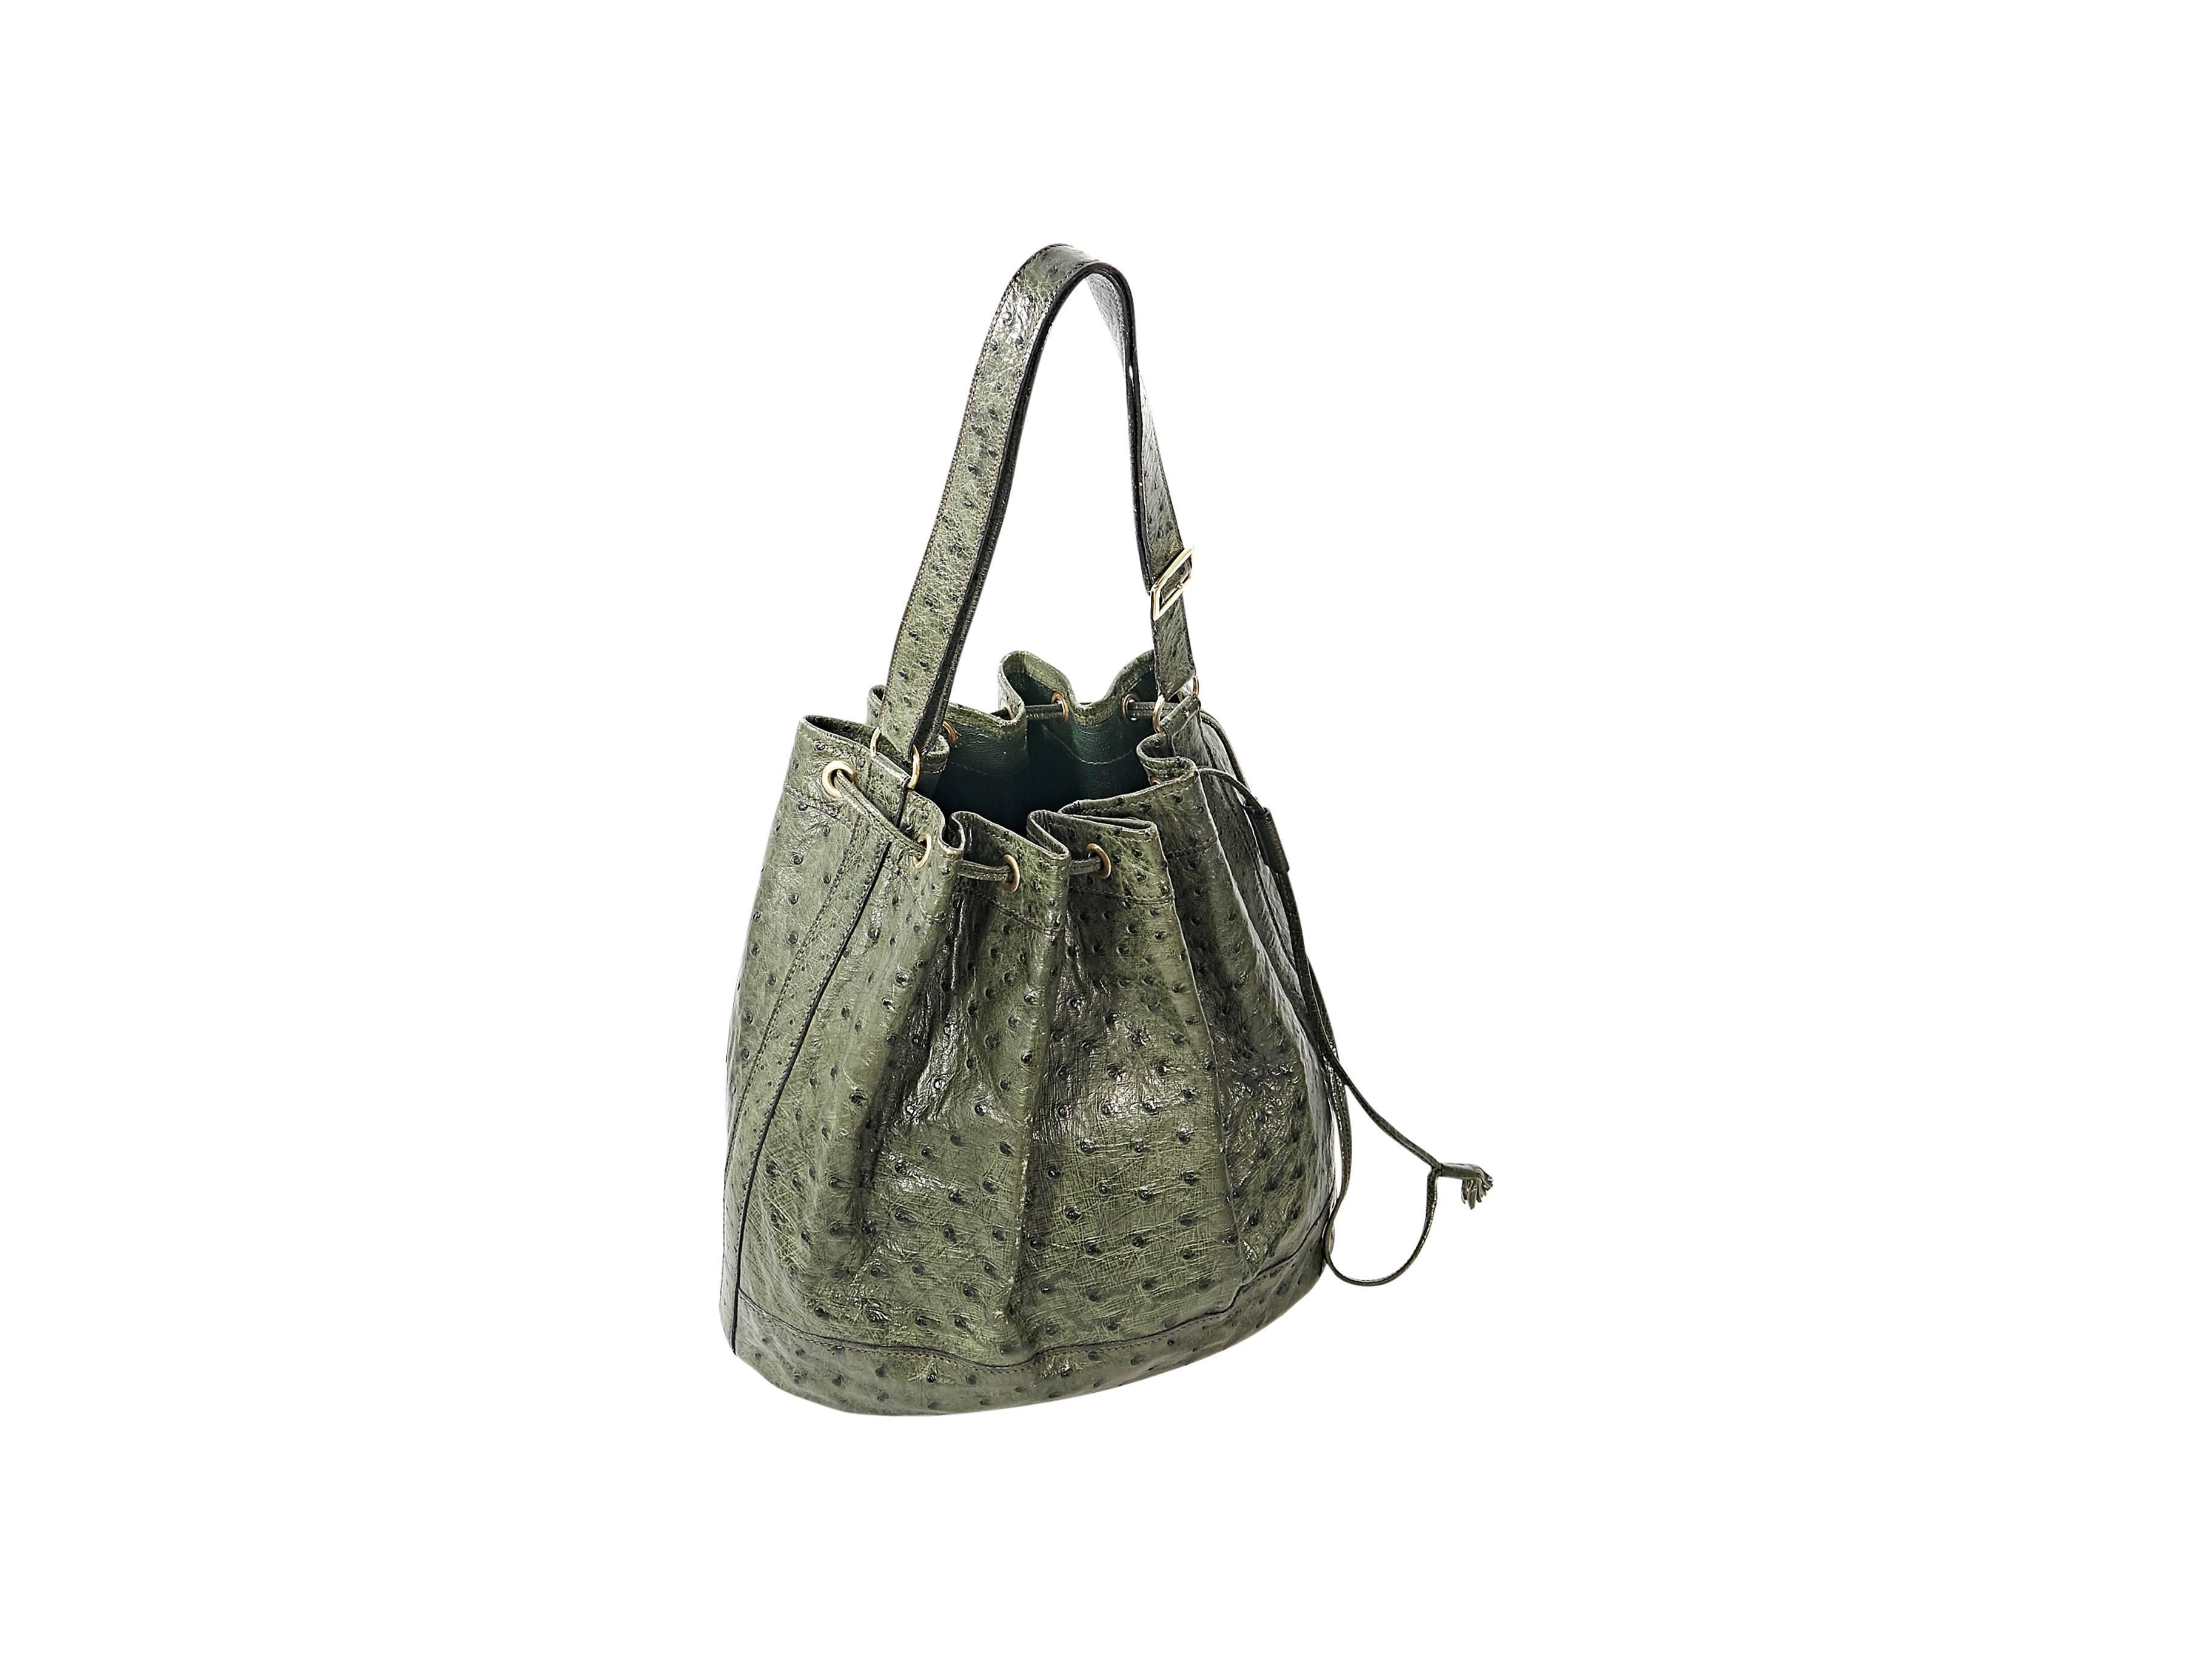 Product details:  Green ostrich vintage bucket bag by Hermes.  Single shoulder strap.  Drawstring closure.  Lined interior.  Goldtone hardware.  11"L x 10.5"H x 5"D.  9.25" strap drop.   
Condition: Good.  Moderate exterior and